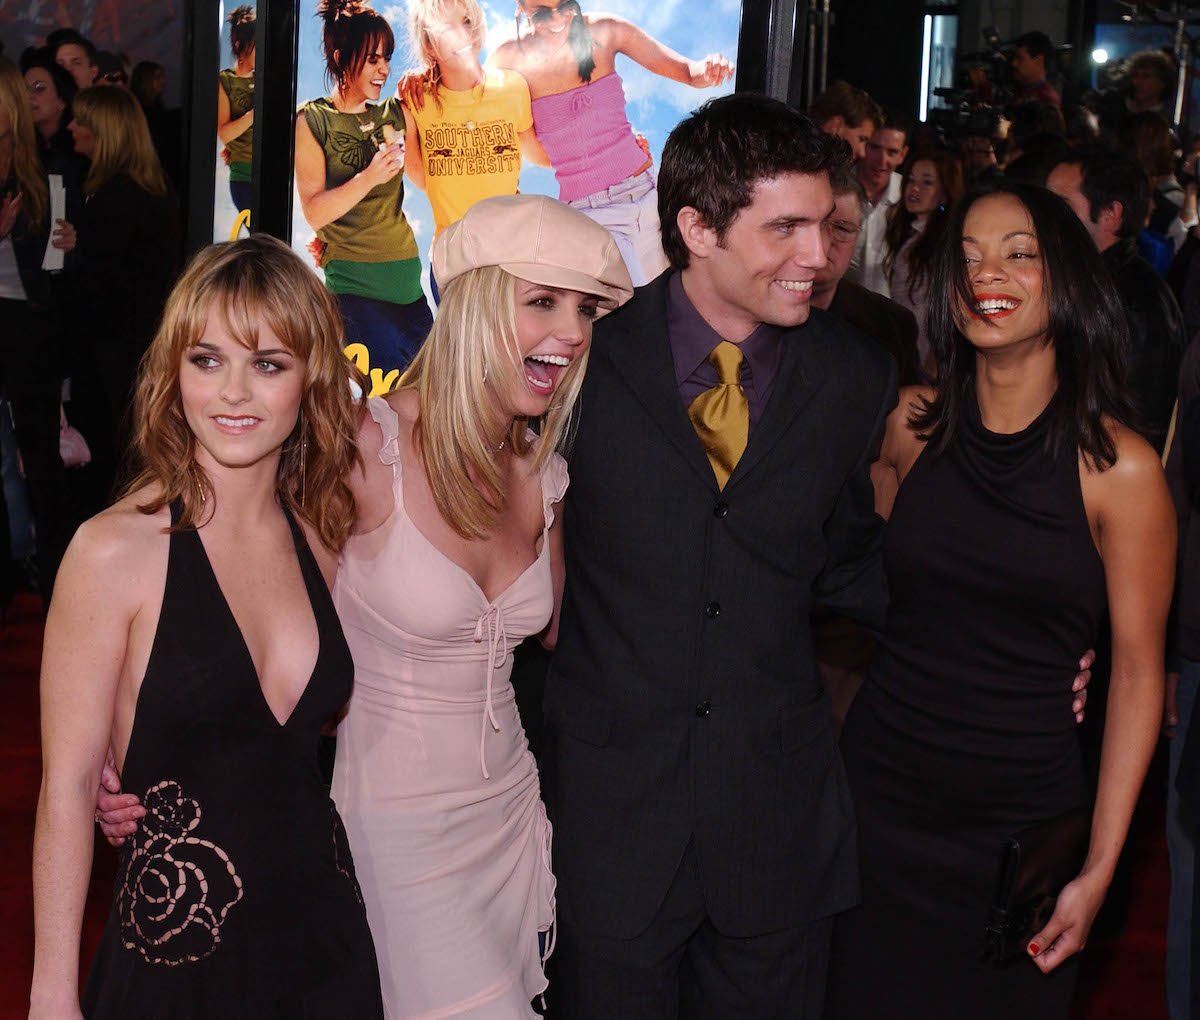 Britney Spears with 'Crossroads' cast members Taryn Manning, Anson Mount, and Zoe Saldana all posing together at a movie event